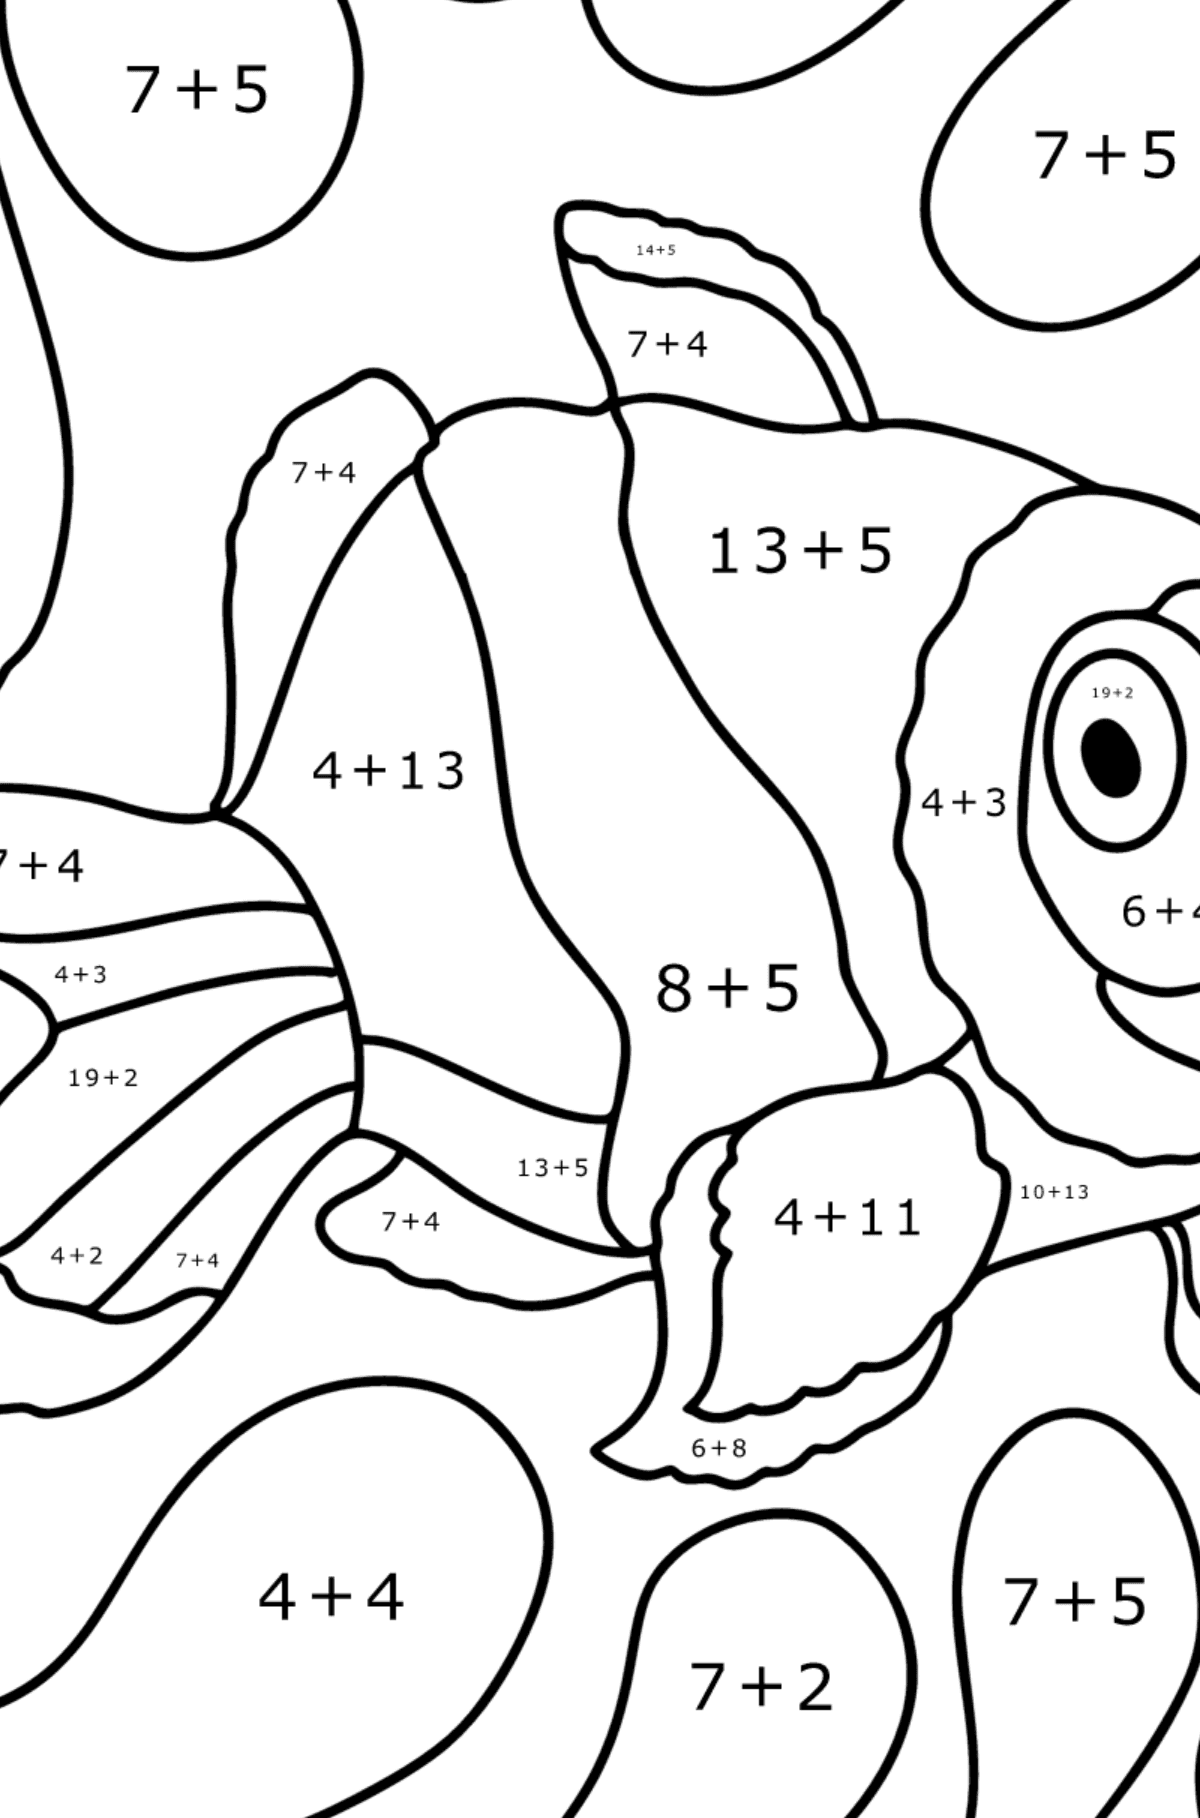 Clown fish coloring page - Math Coloring - Addition for Kids